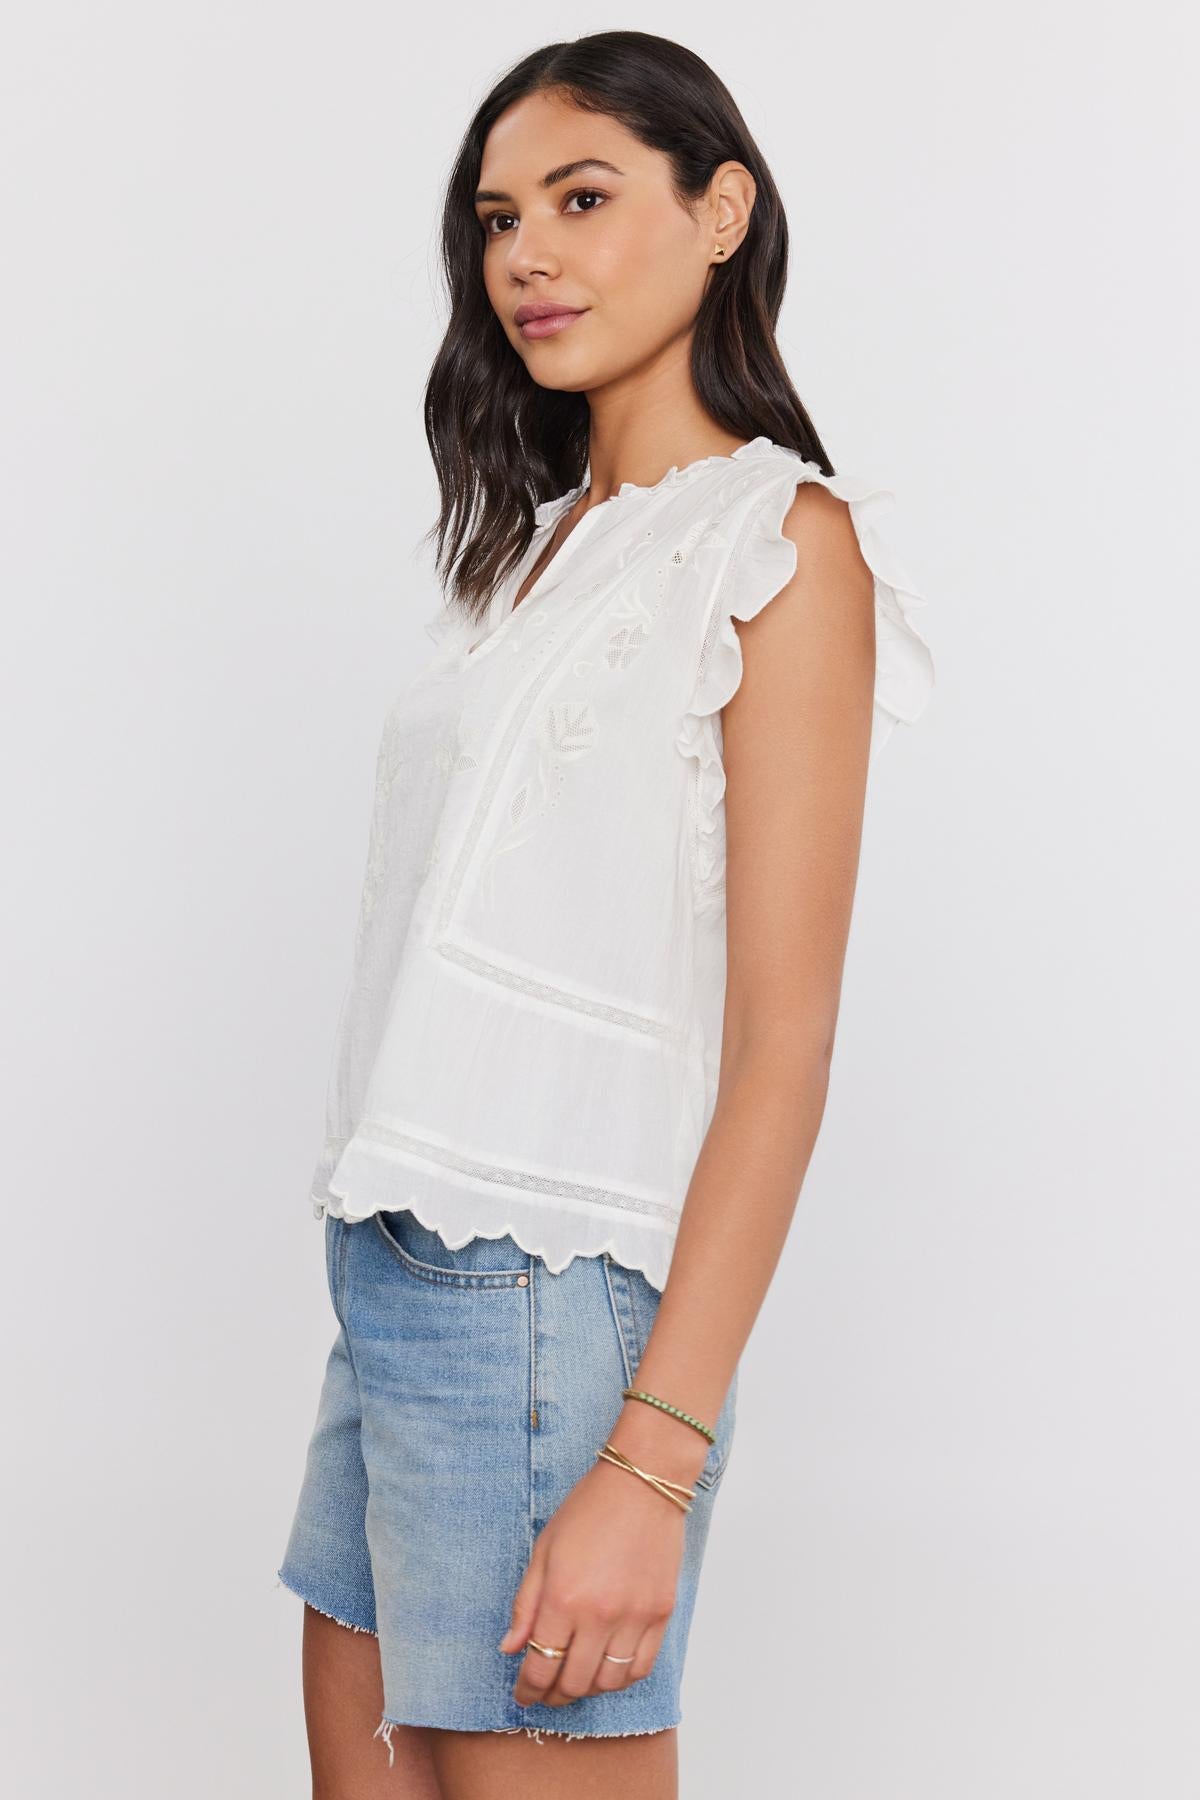 A woman wearing a white CHARLENE TOP with cotton embroidery and denim shorts, standing with a slight smile, facing towards the camera. Brand: Velvet by Graham & Spencer-36830326784193